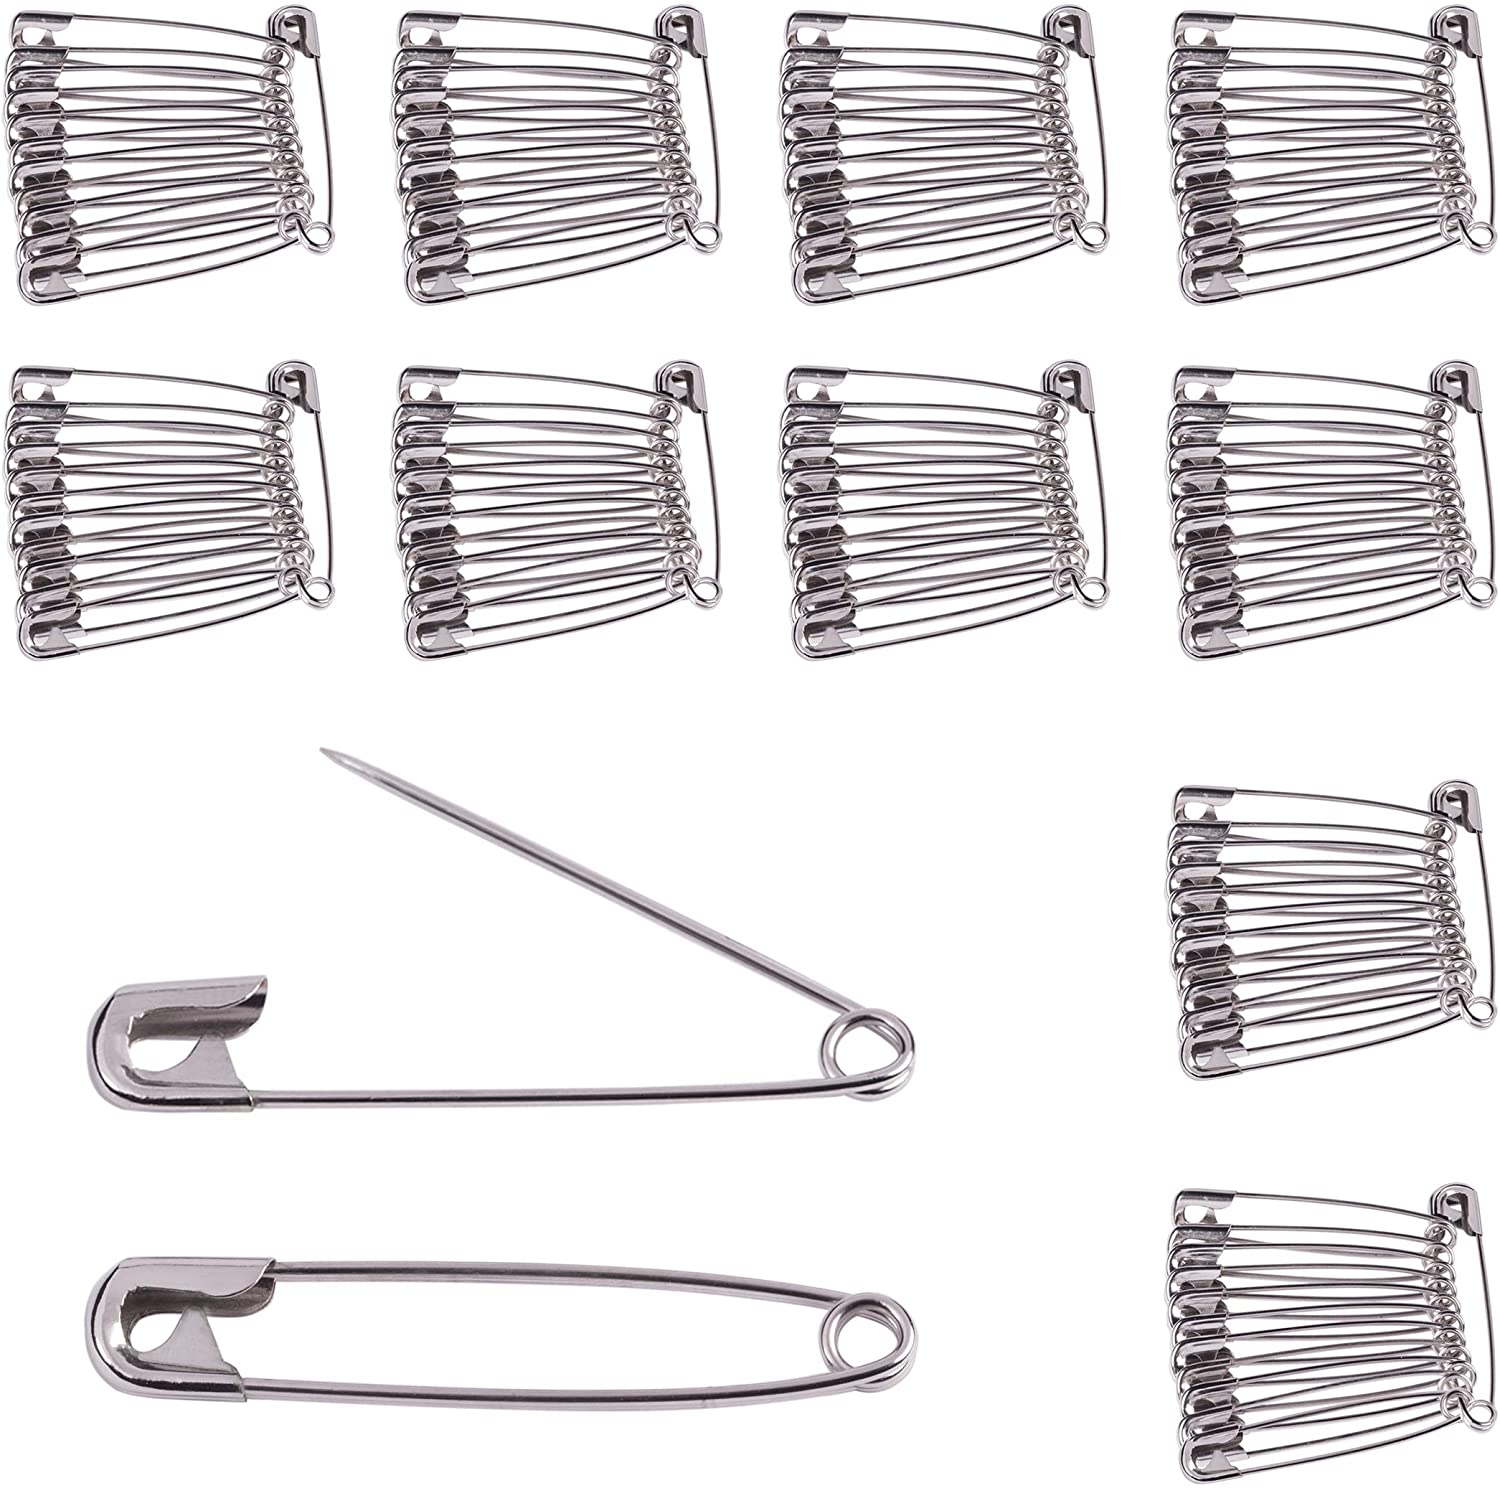 Beadnova Small Safety Pins Size 1 Nickel Finish Clothing Pins Safety Pins For Clothes Garment